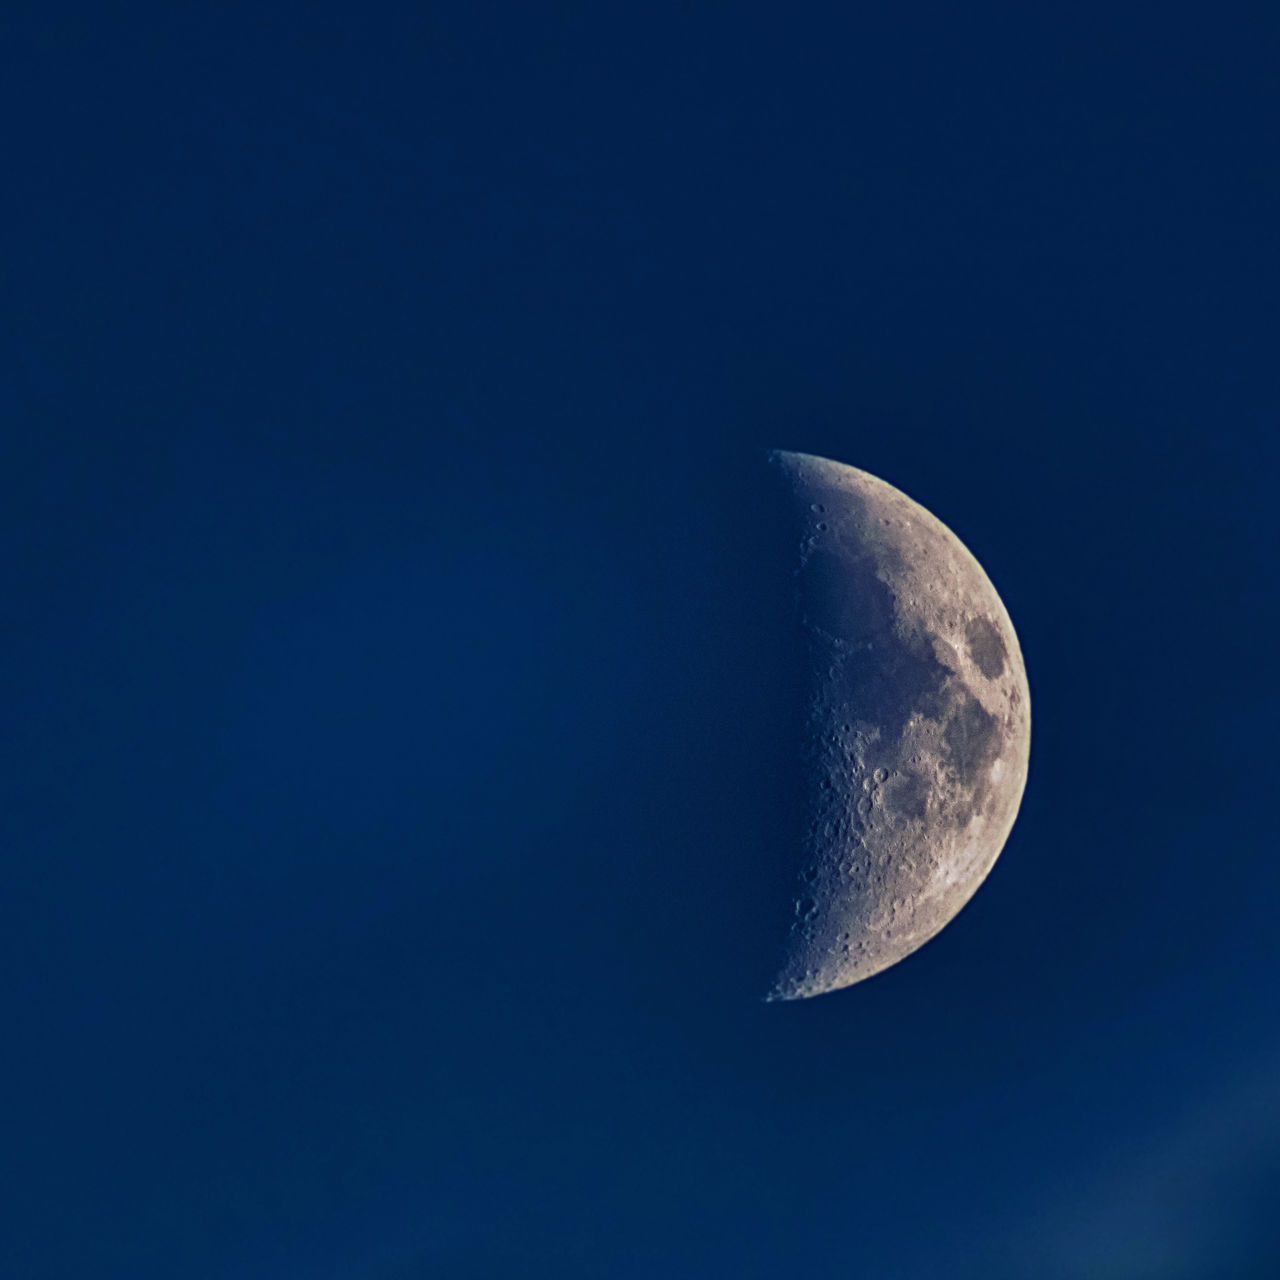 LOW ANGLE VIEW OF MOON AGAINST CLEAR BLUE SKY